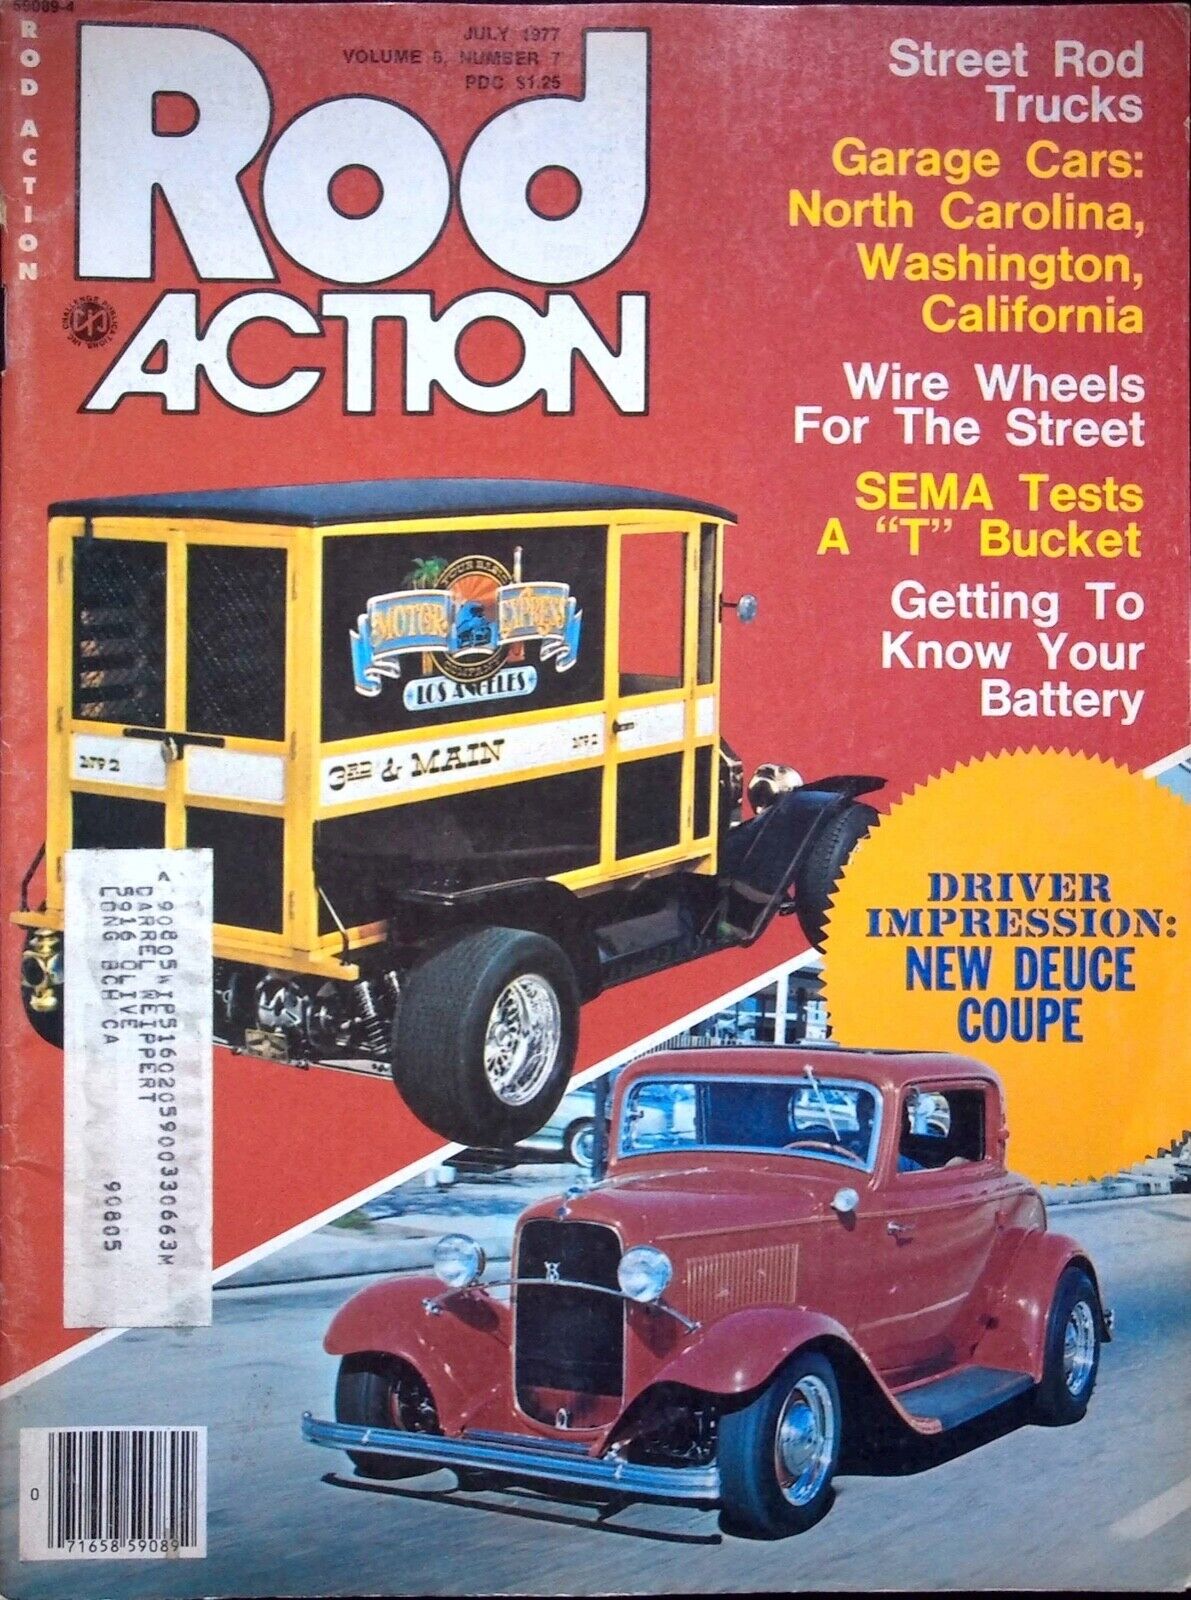 1932 FORD 3-WINDOW COUPE - ROD ACTION MAGAZINE, VOL 6, NO  7 JULY 1977